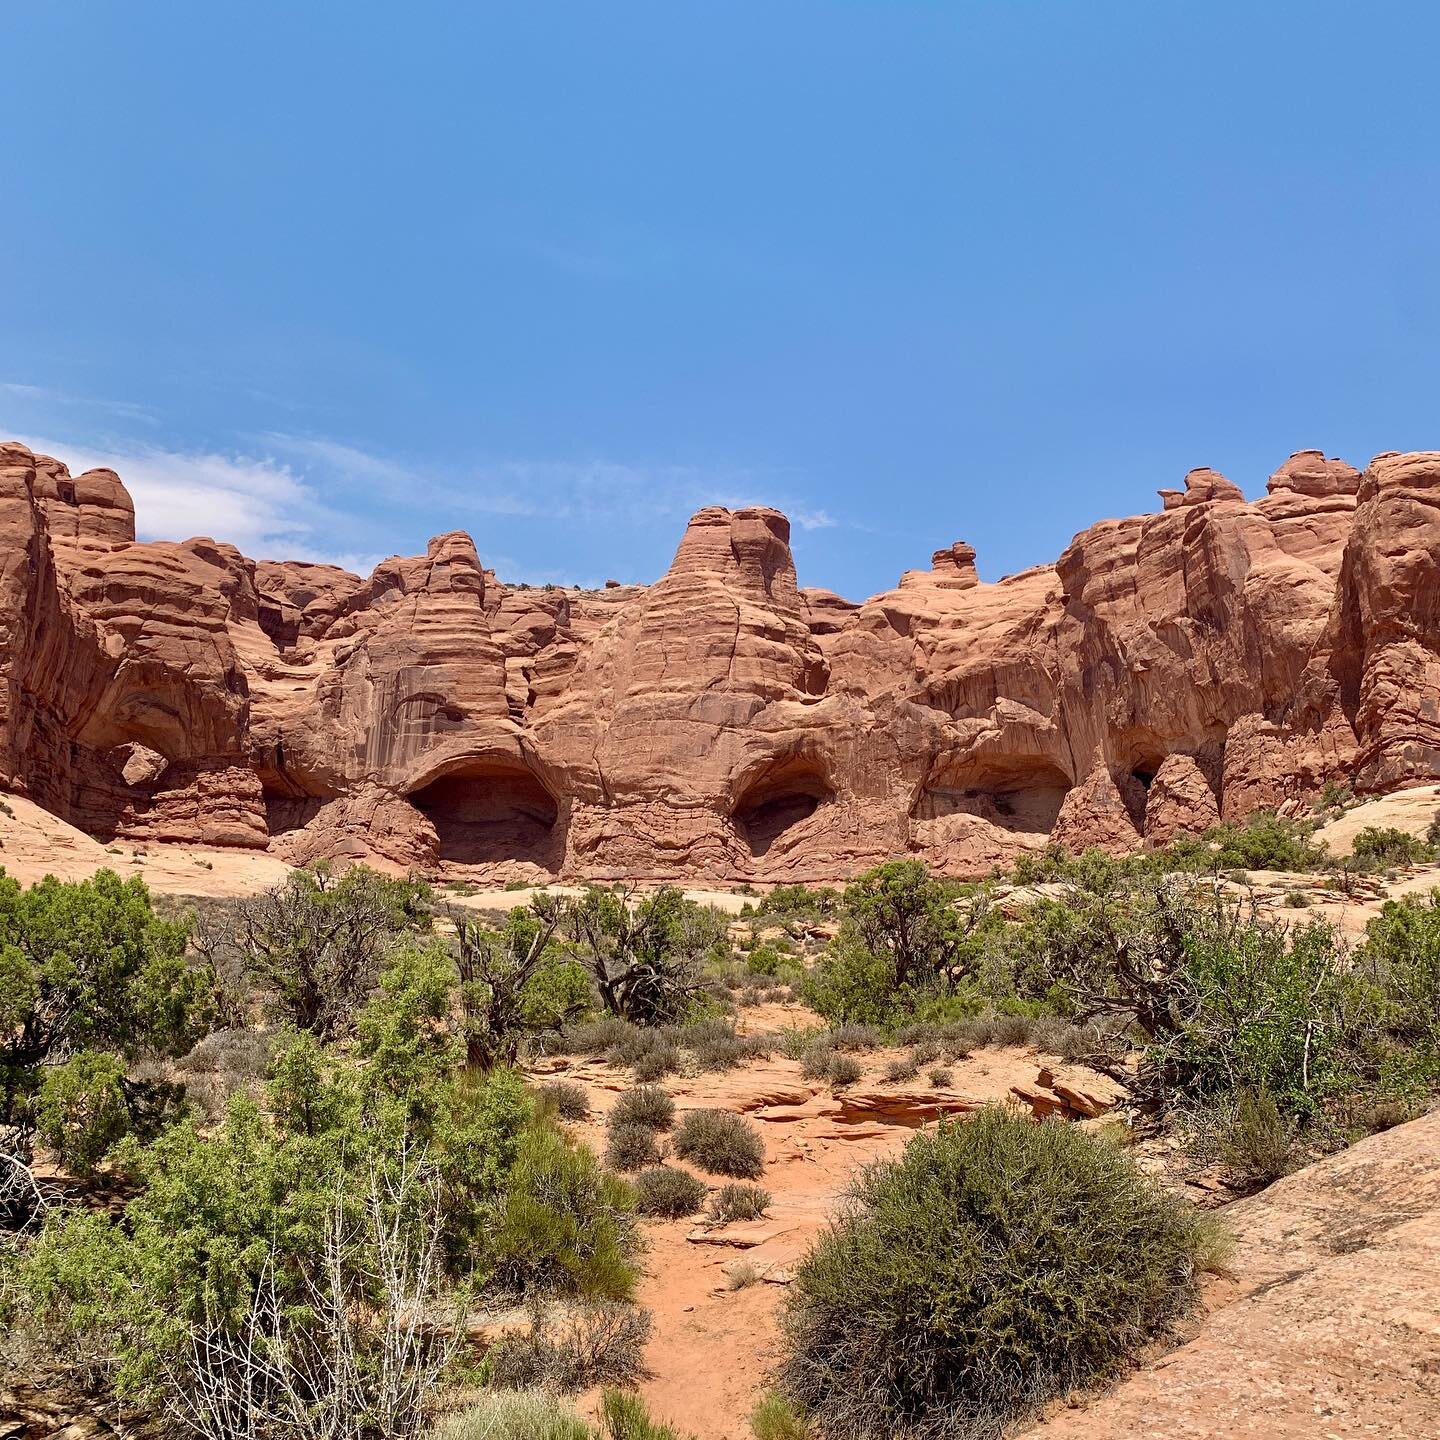 Arches National Park might win the contest for the shortest amount of time I&rsquo;ve spent in a park. I made the mistake of taking an easy morning and not arriving until the afternoon&mdash;temperatures above 100 degrees made the visit pretty uncomf